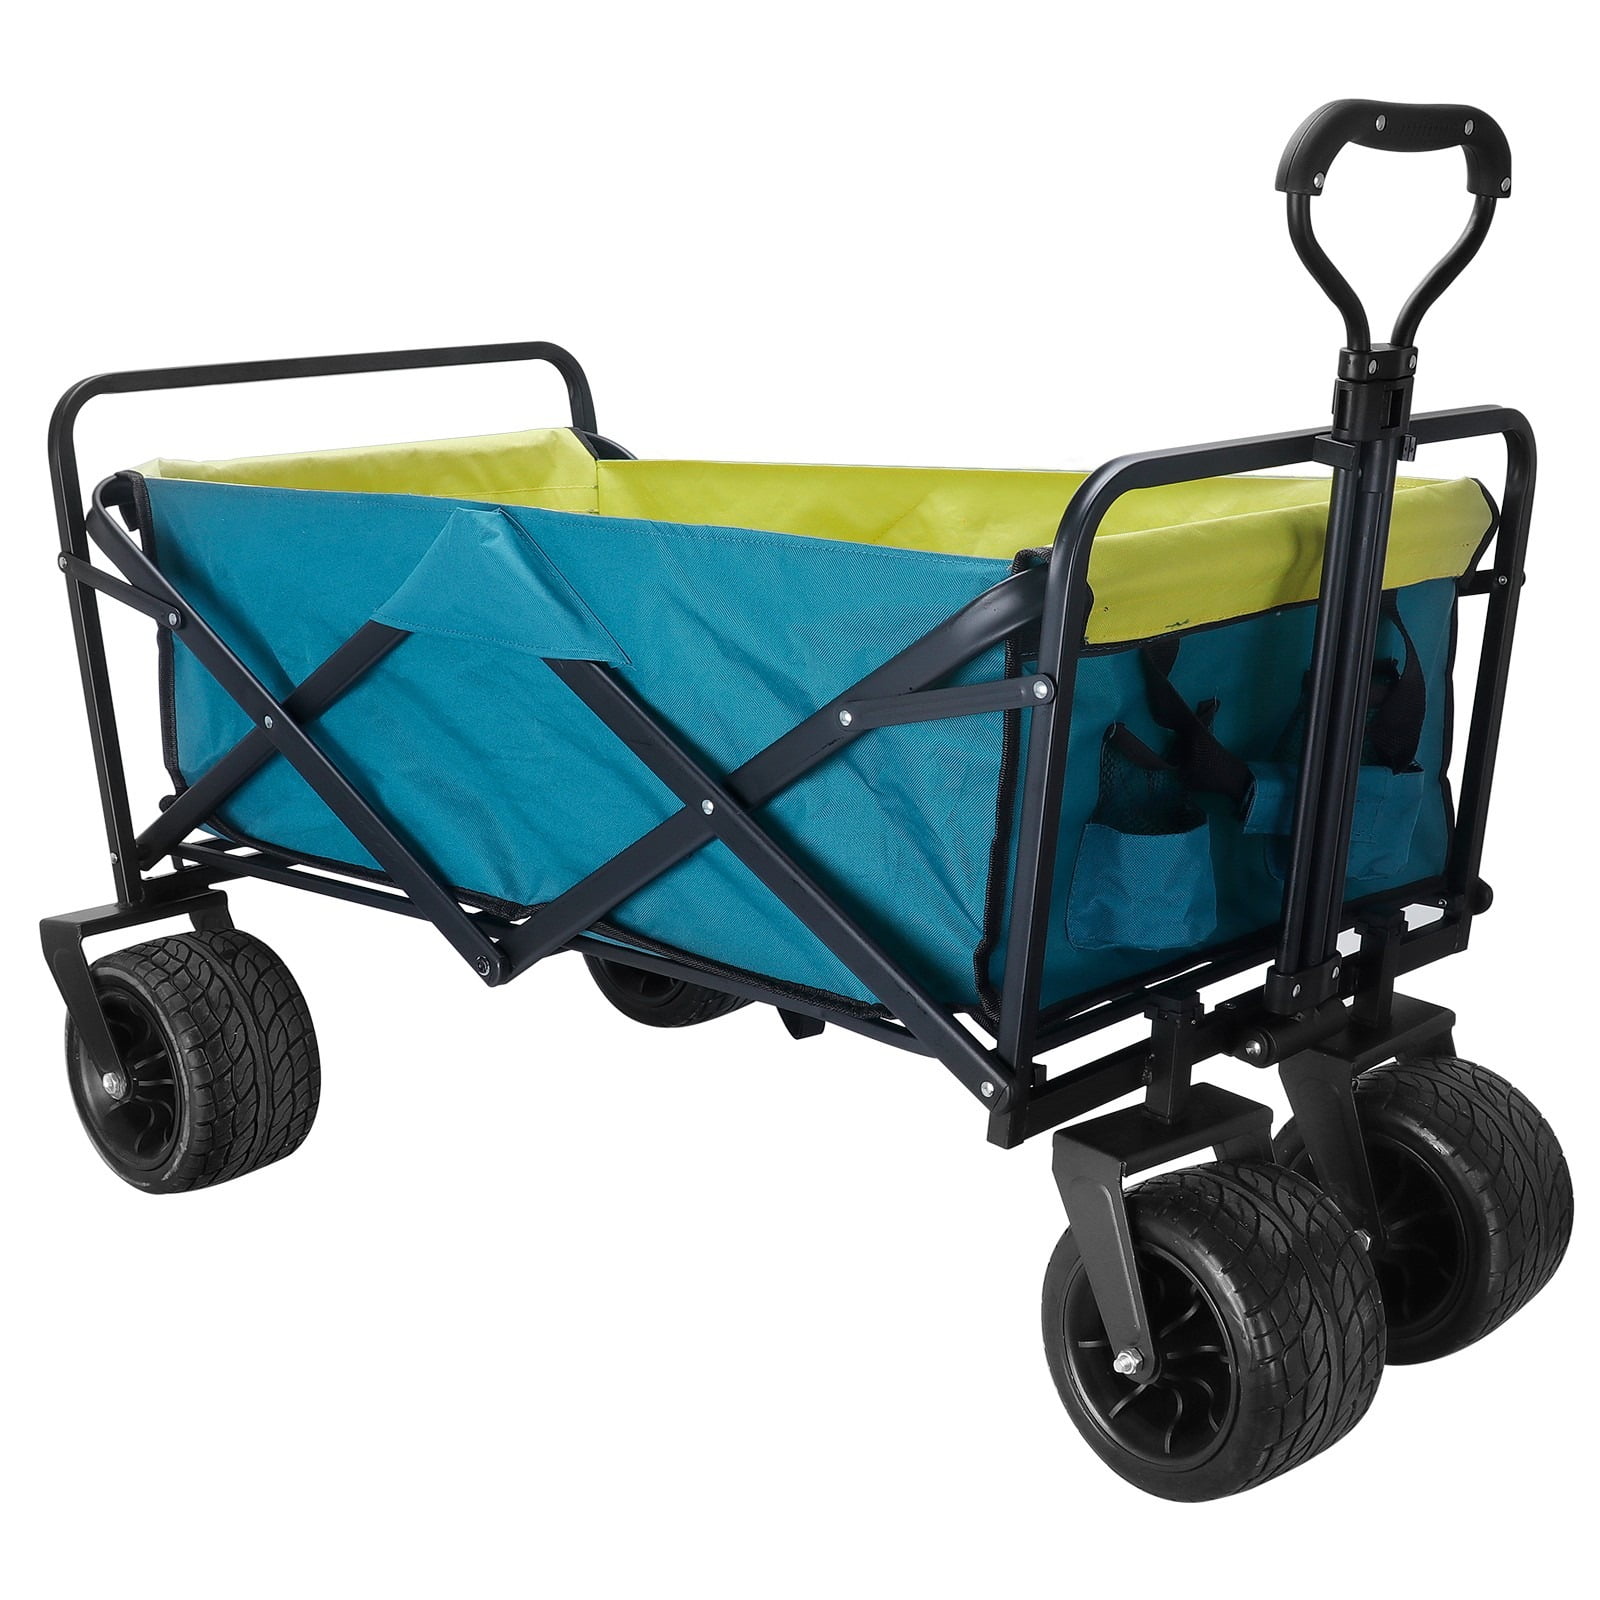 Bundle Straps Mac Sports Foldable Heavy Duty Utility Garden Cart Wagon with Table Teal 